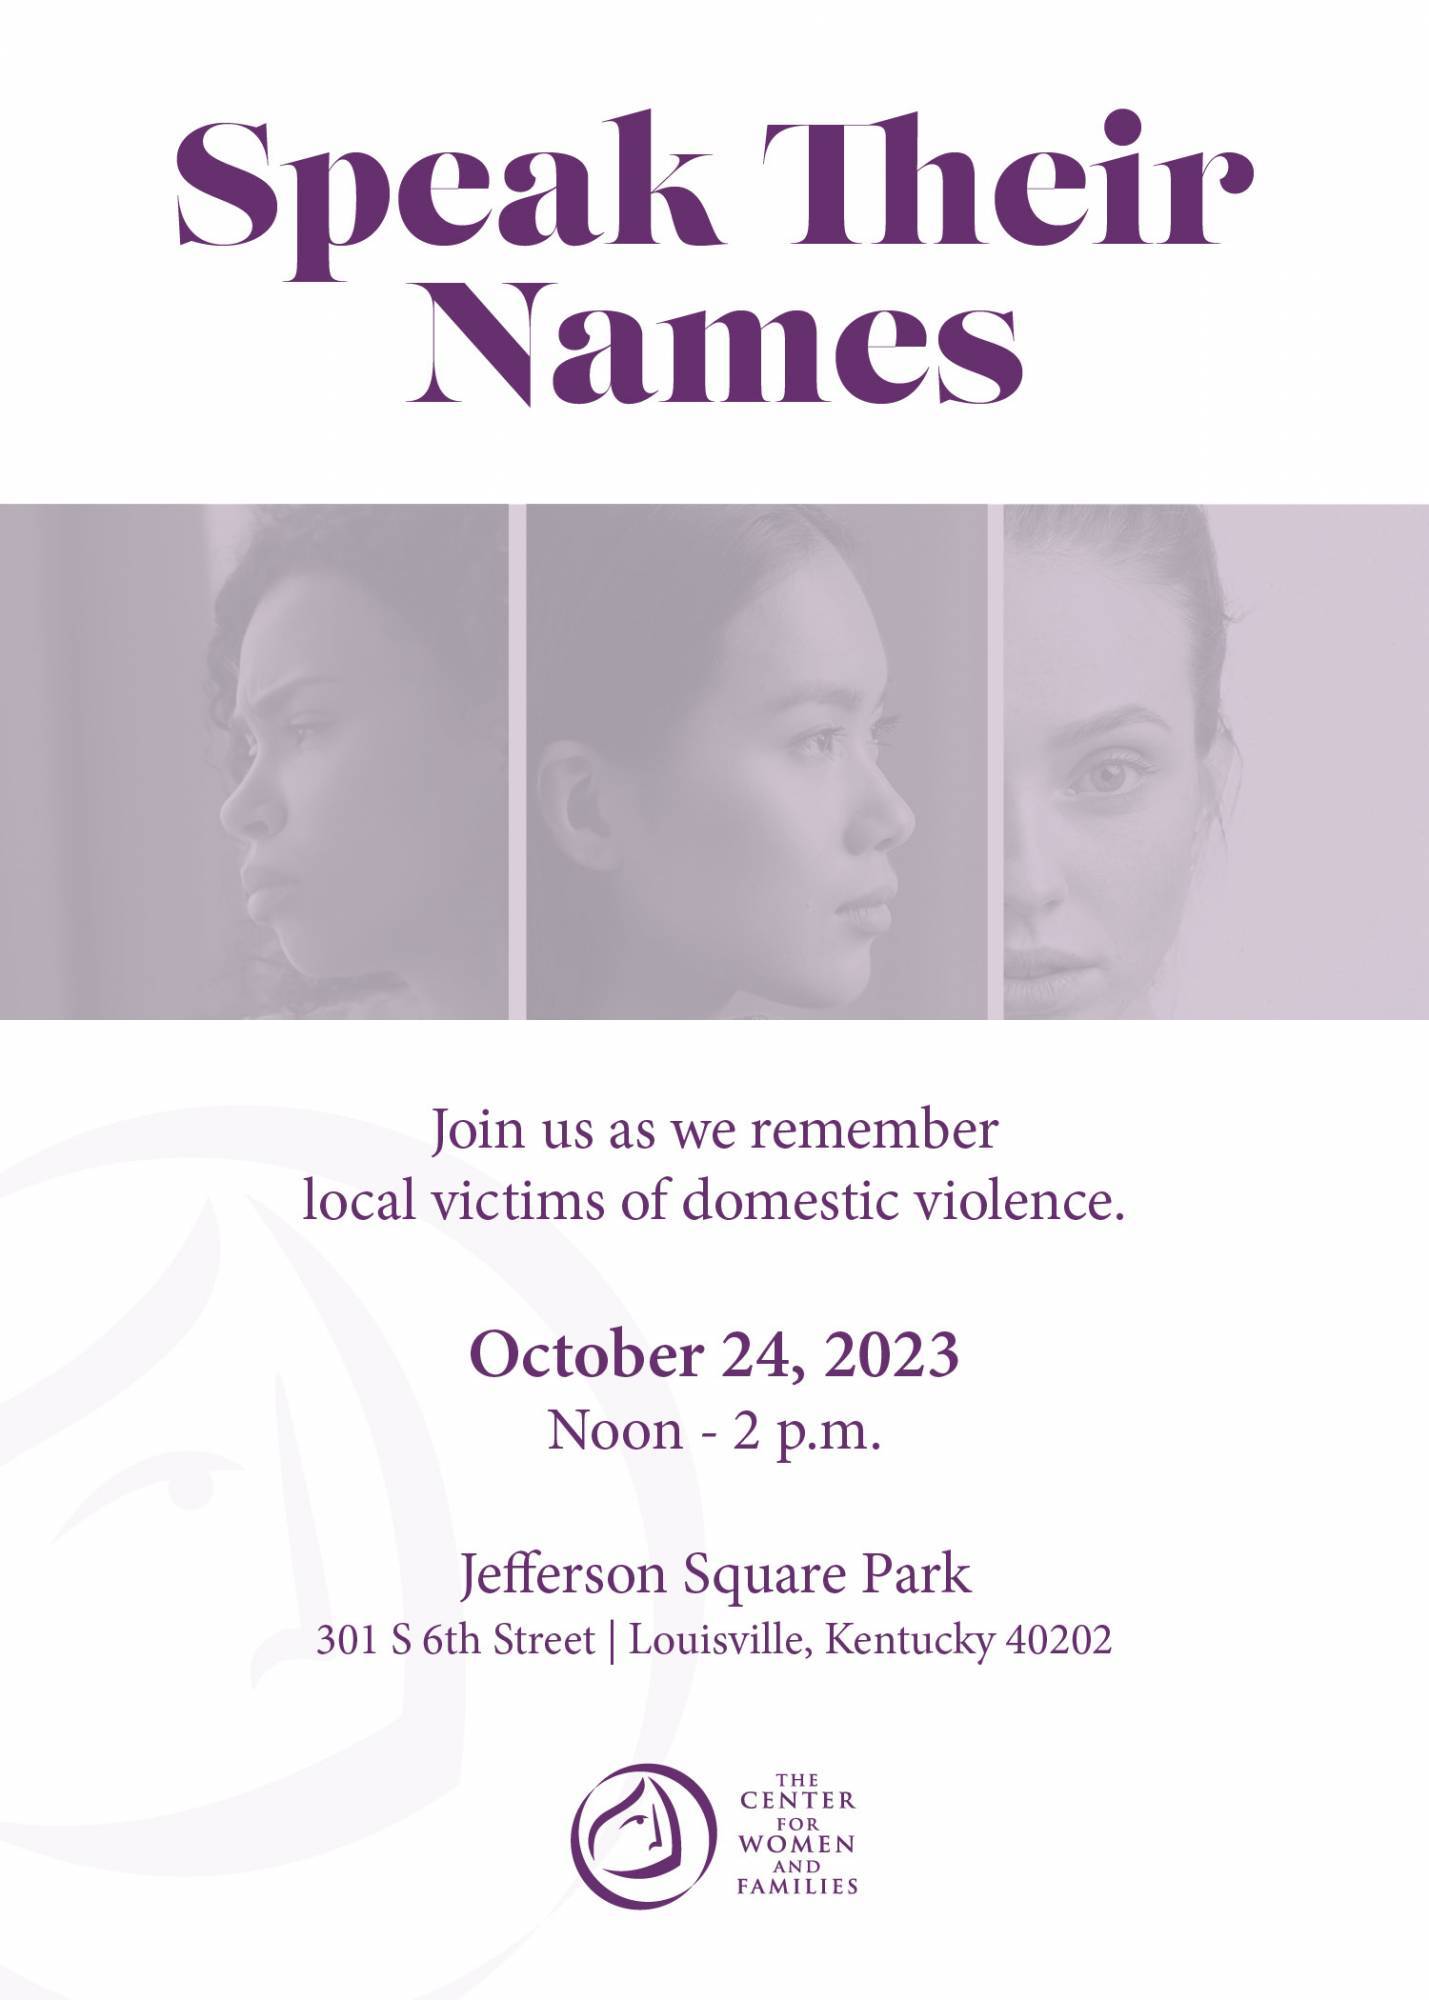 Image of invitation to Speak Their Names Event on October 24 at noon at Jefferson Square Park to remember victims of domestic violence. Image includes photos of three women, along with date, time and location for event. 